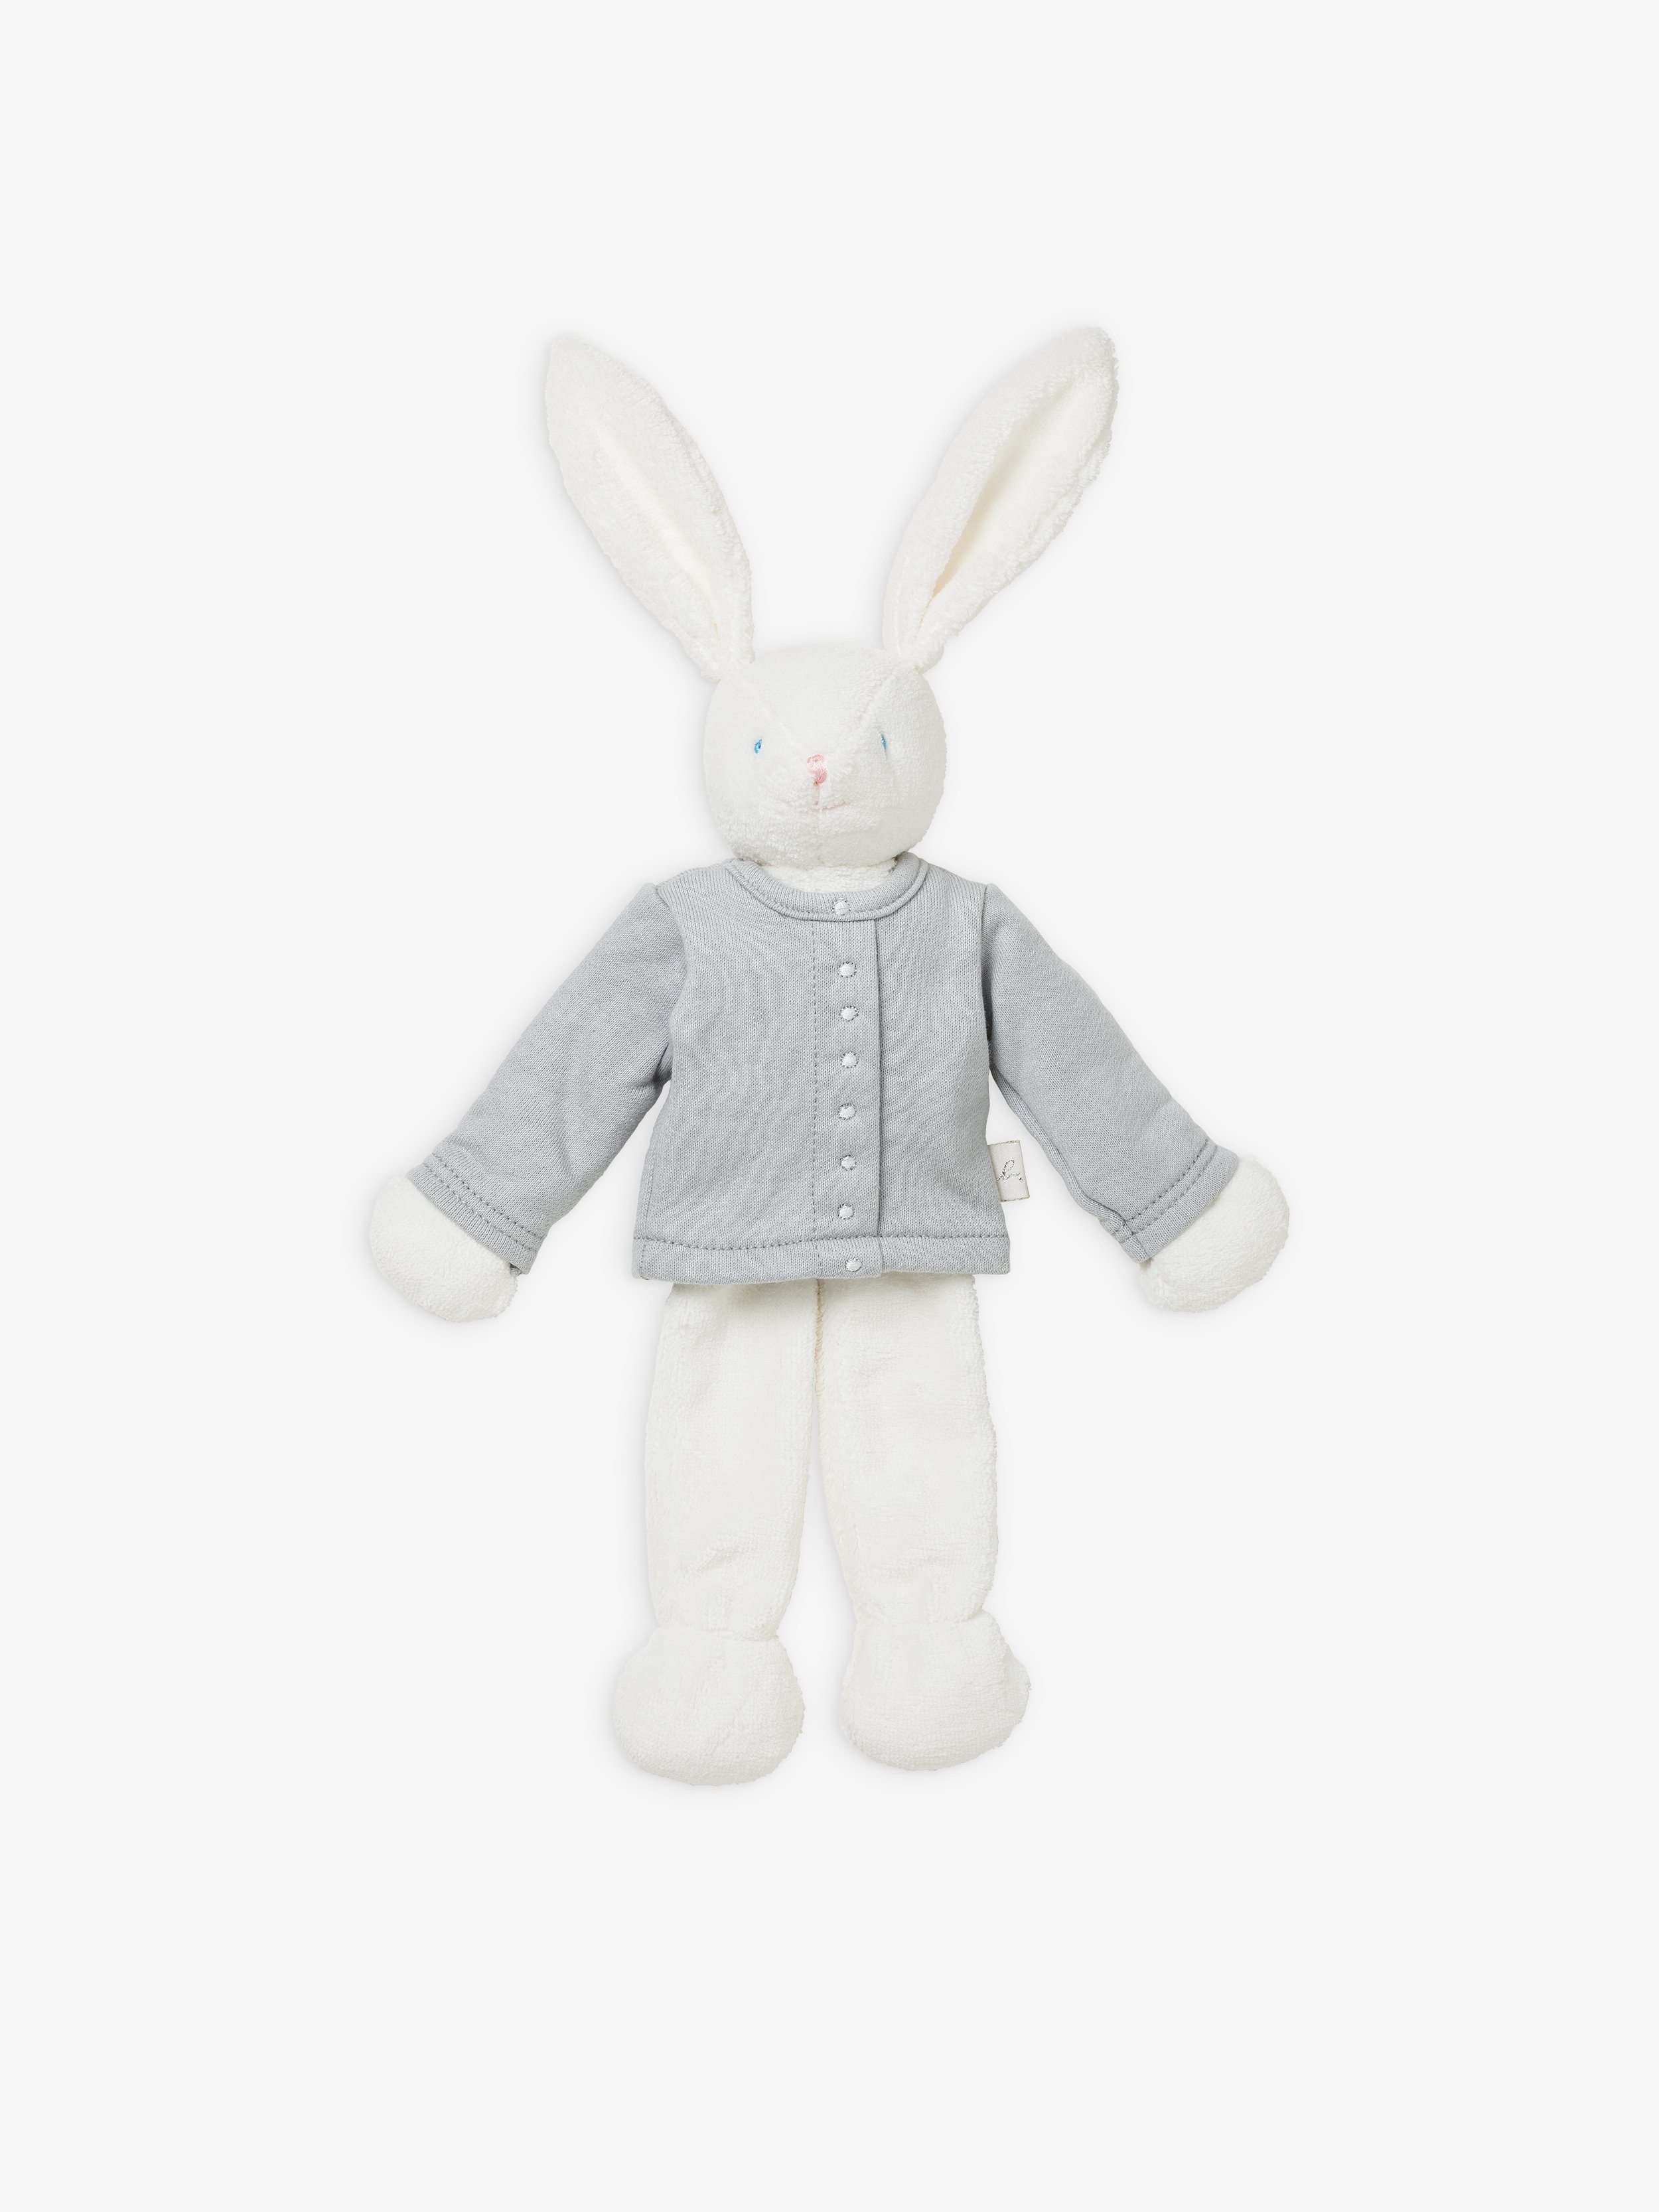 easter bunny cuddly toy